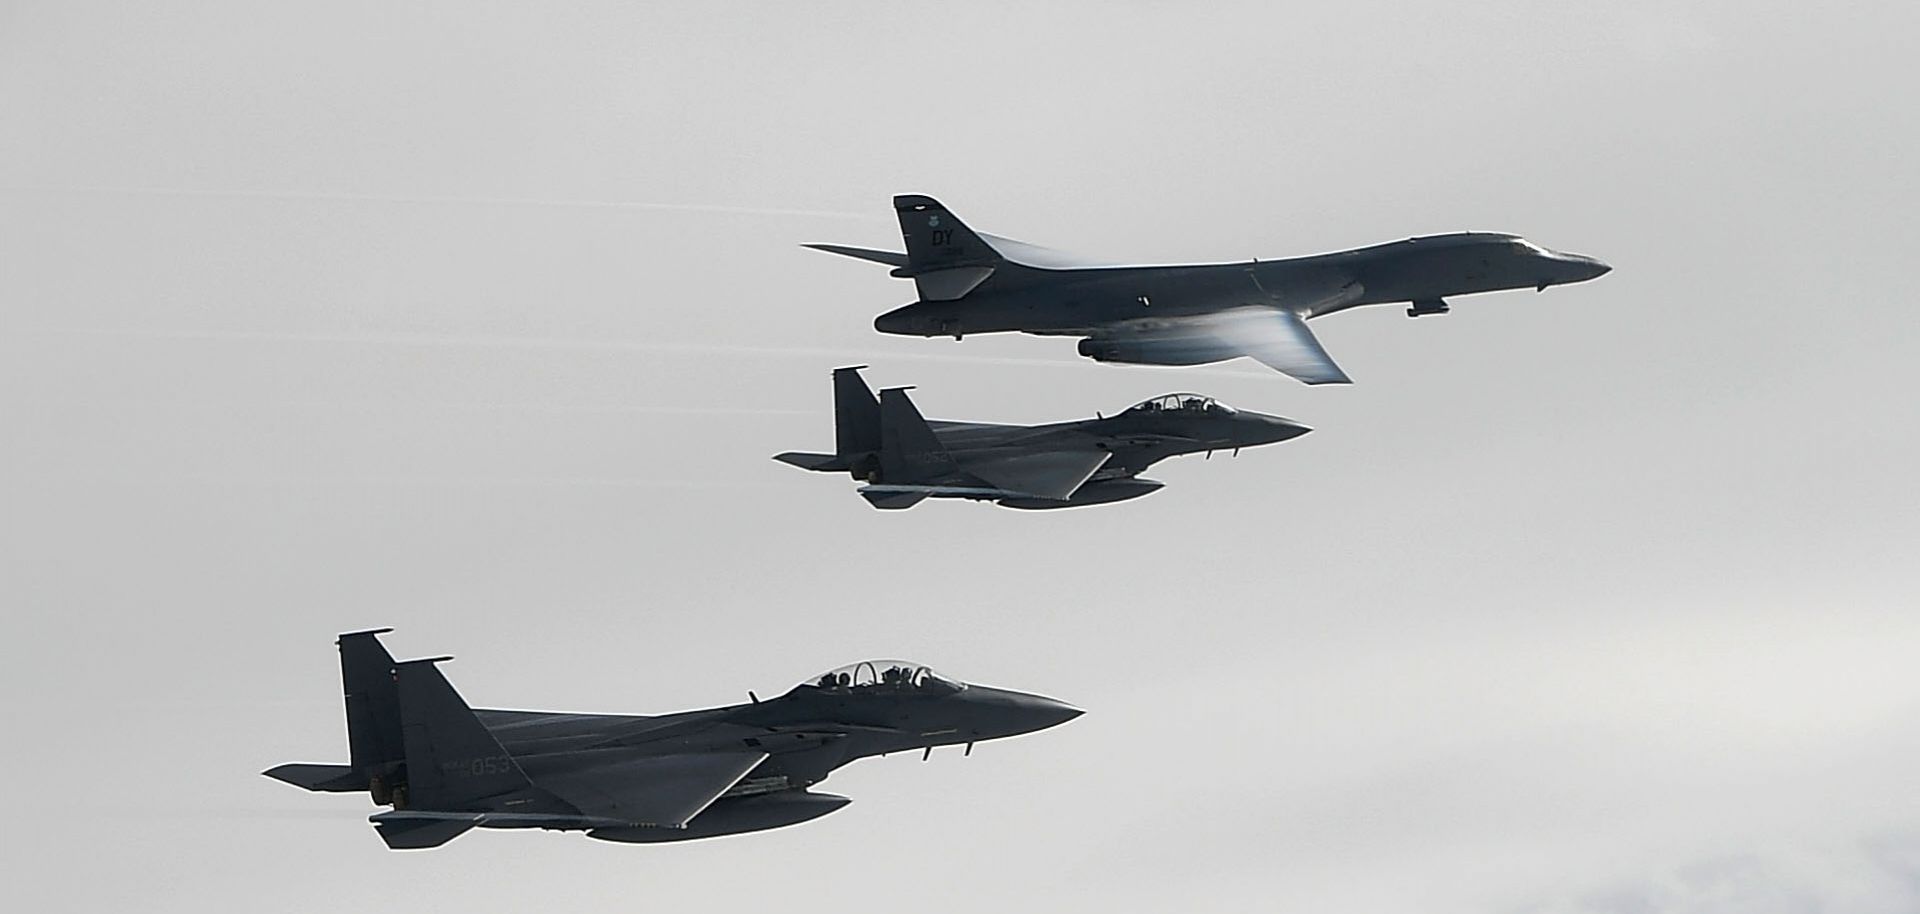 U.S. and South Korean jets fly over the Korean Peninsula during a joint exercise in July 2017.